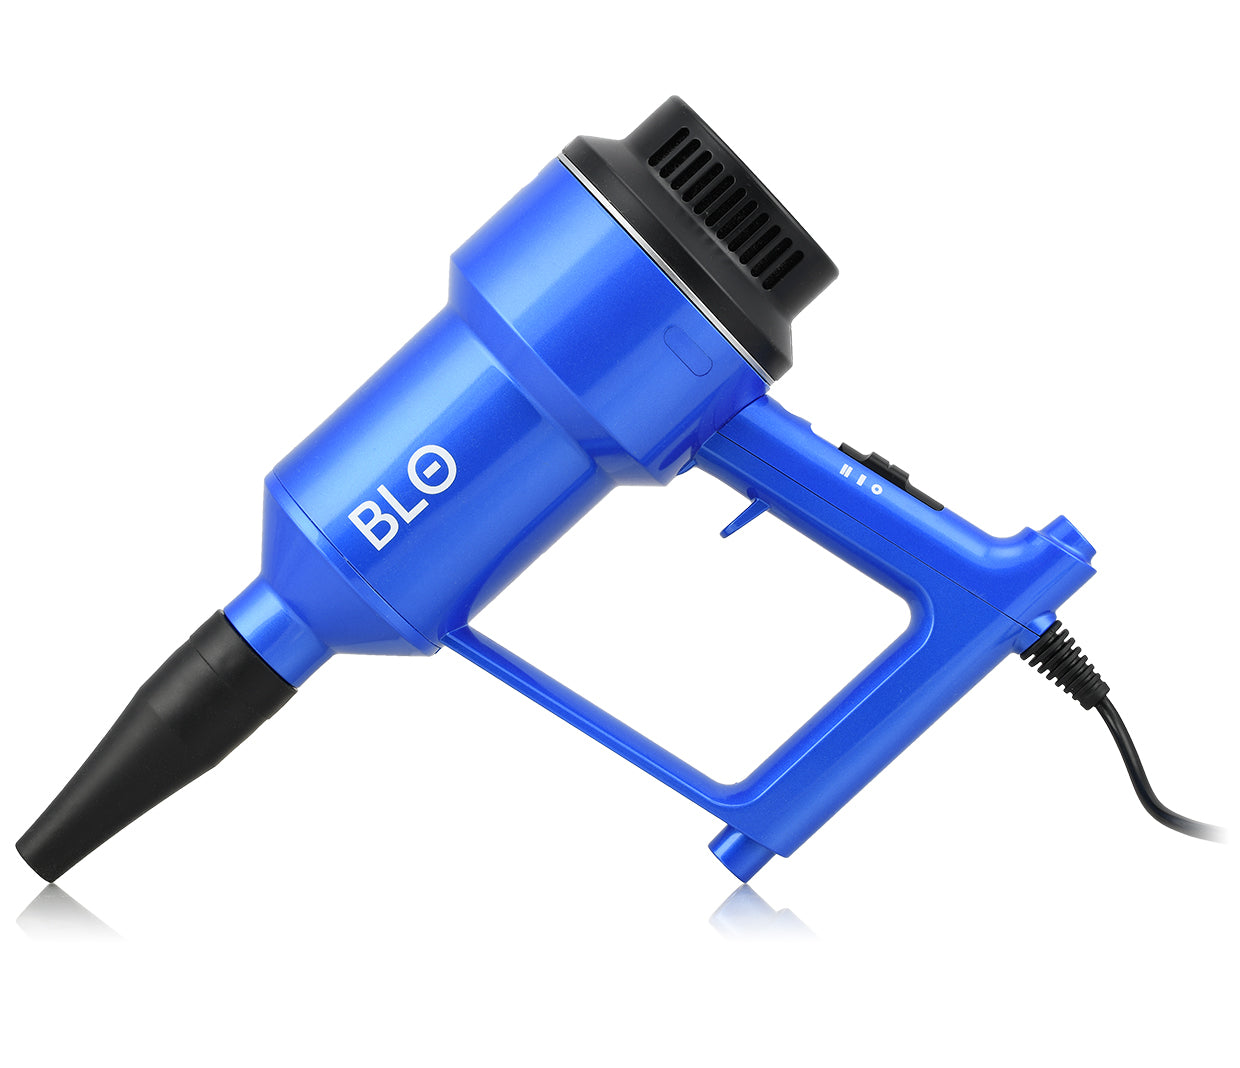 BLO AIR-S Hand Held Car Dryer — Polished Bliss